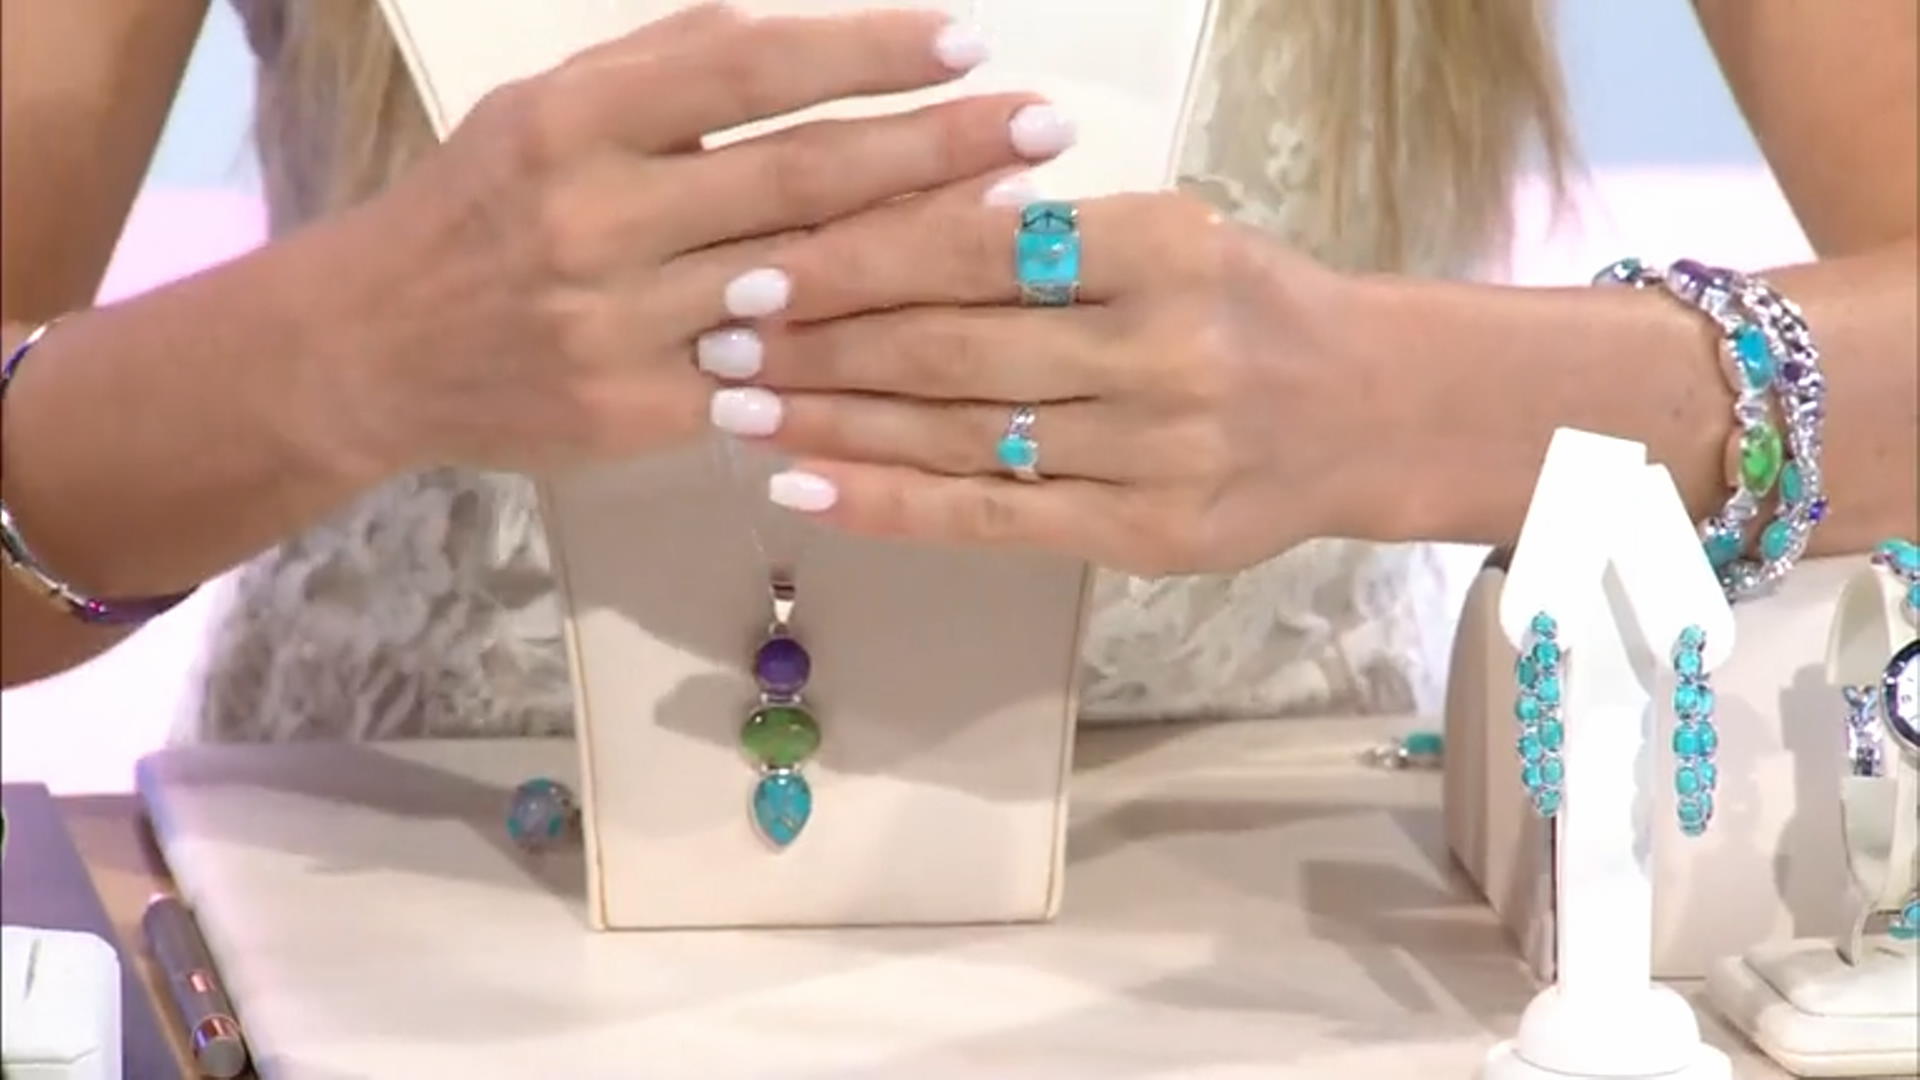 Blue Turquoise Sterling Silver Stackable Ring Set Of 4 Video Thumbnail